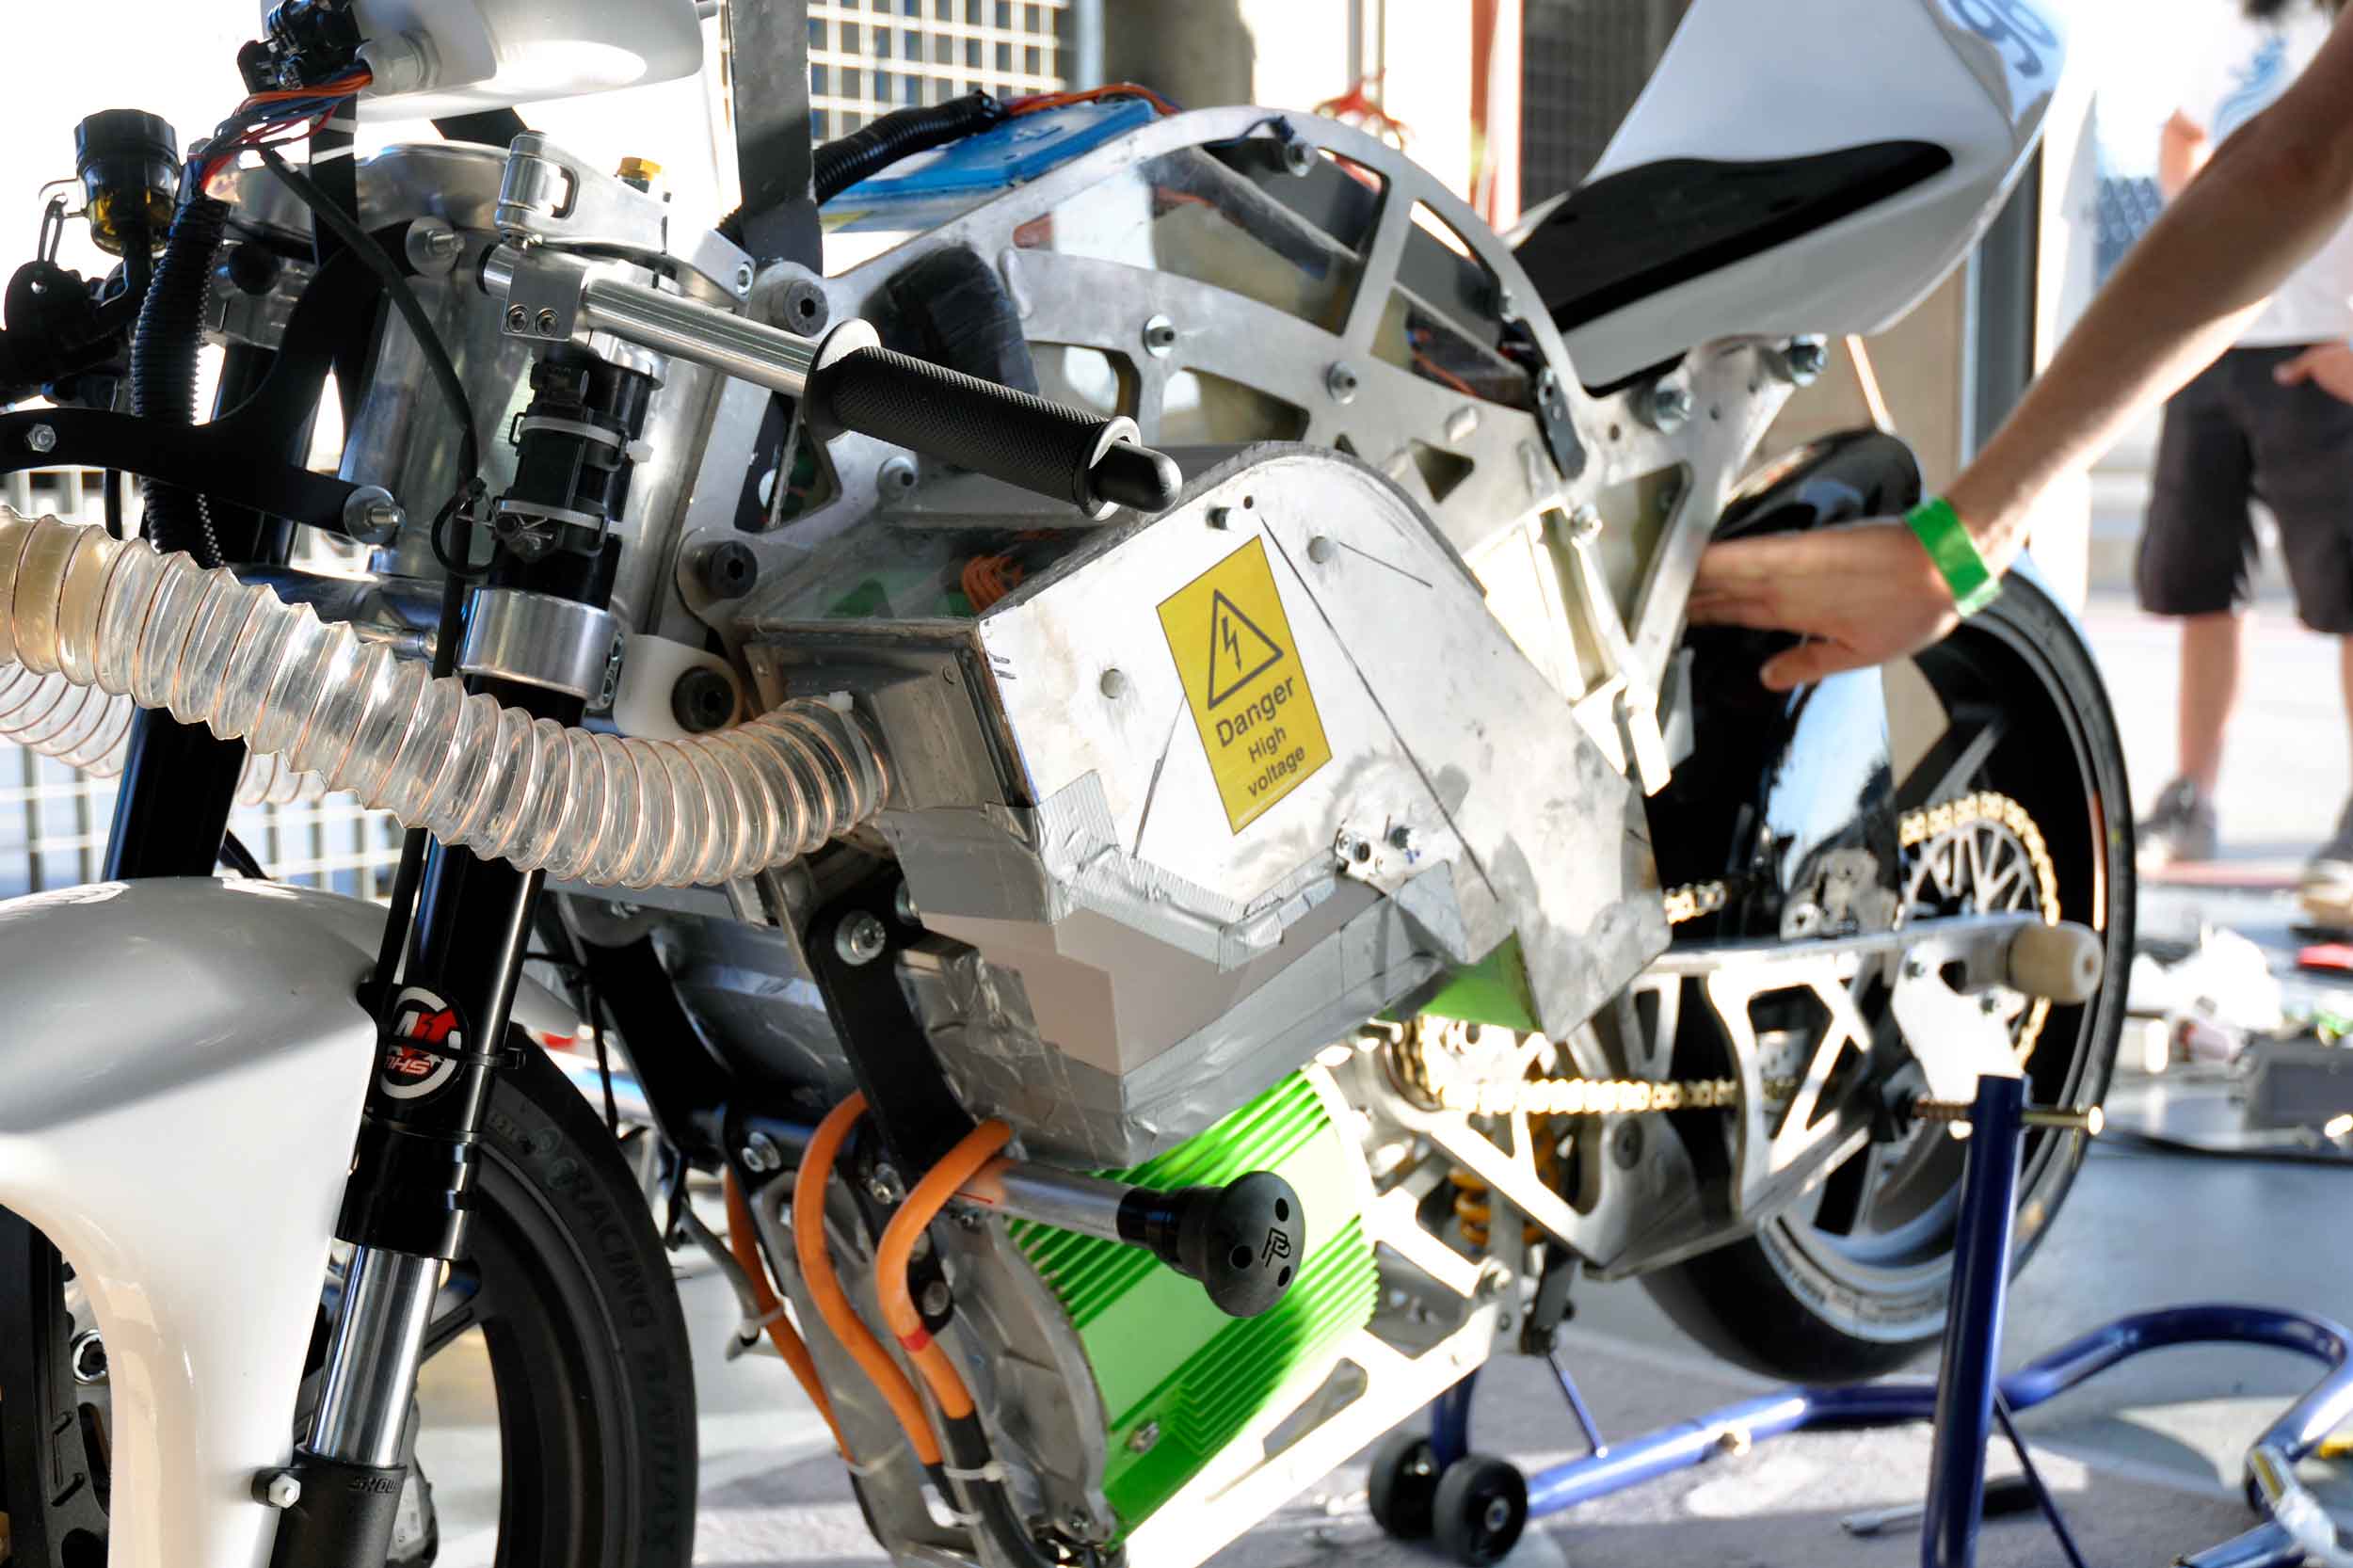 Hydrogen fuel cell in the bike's frame